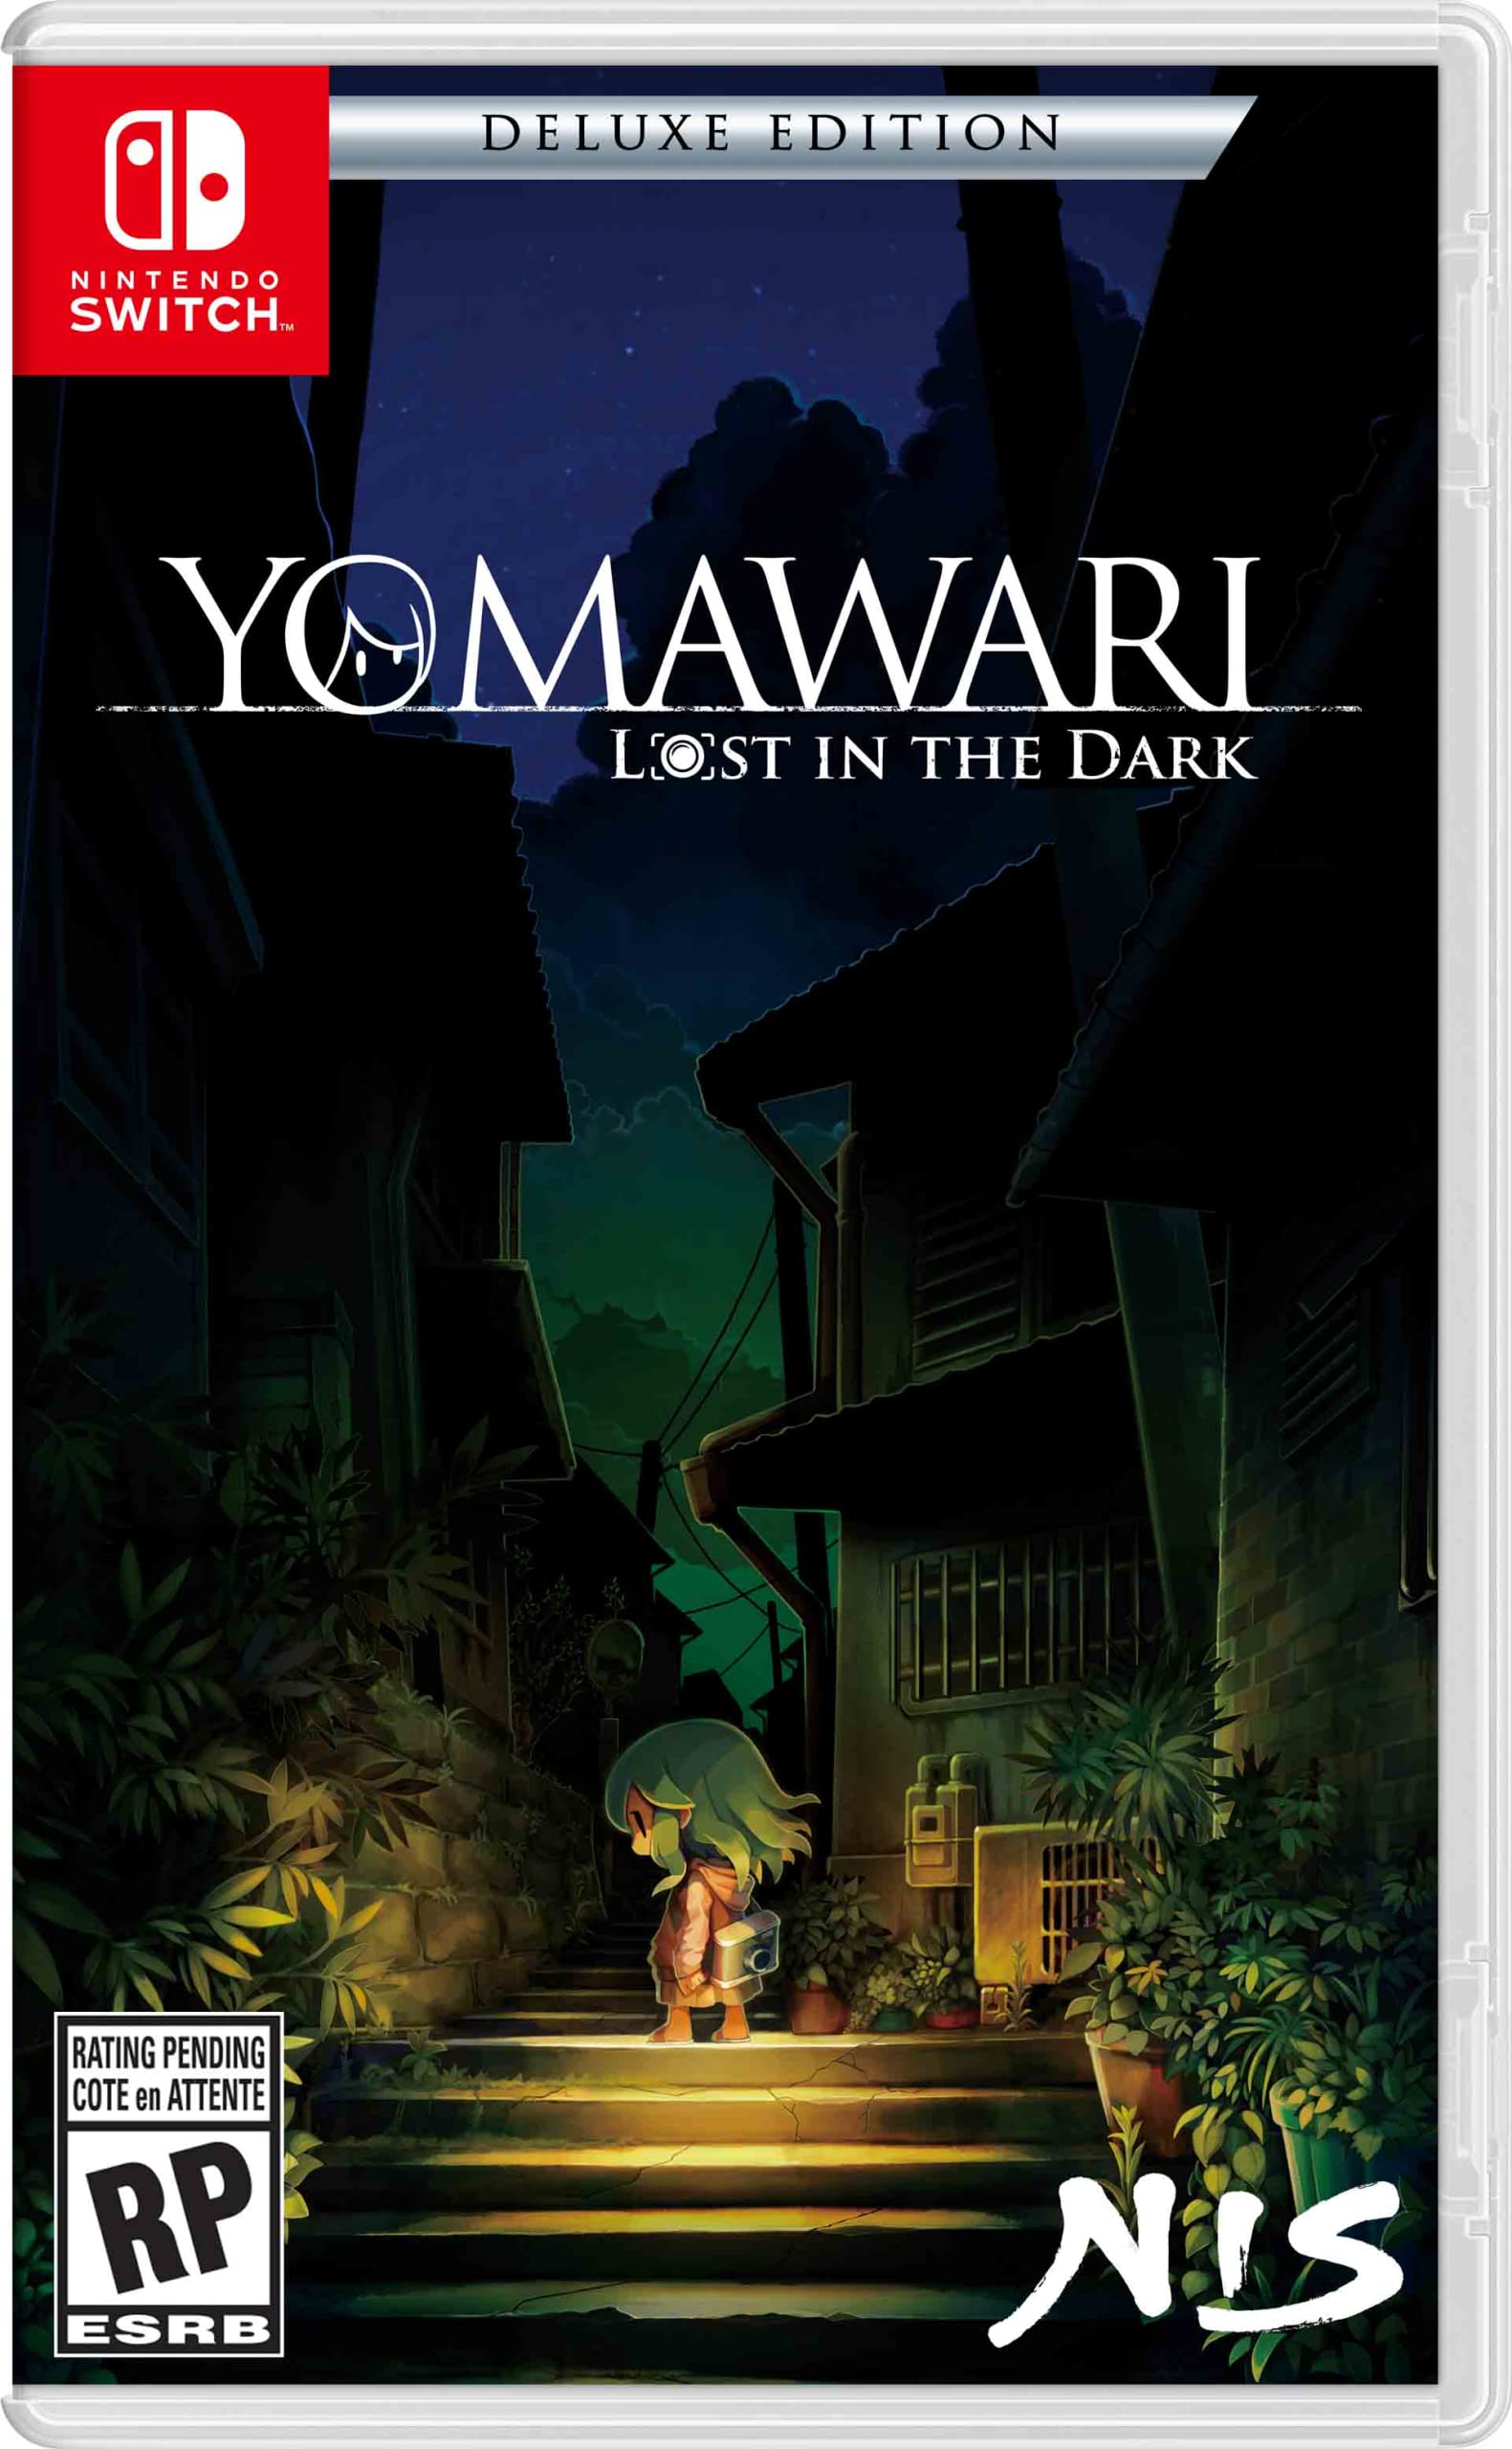 Yomawari: Lost in the Dark Deluxe Edition (Nintendo Switch) $40.45 + Free Shipping